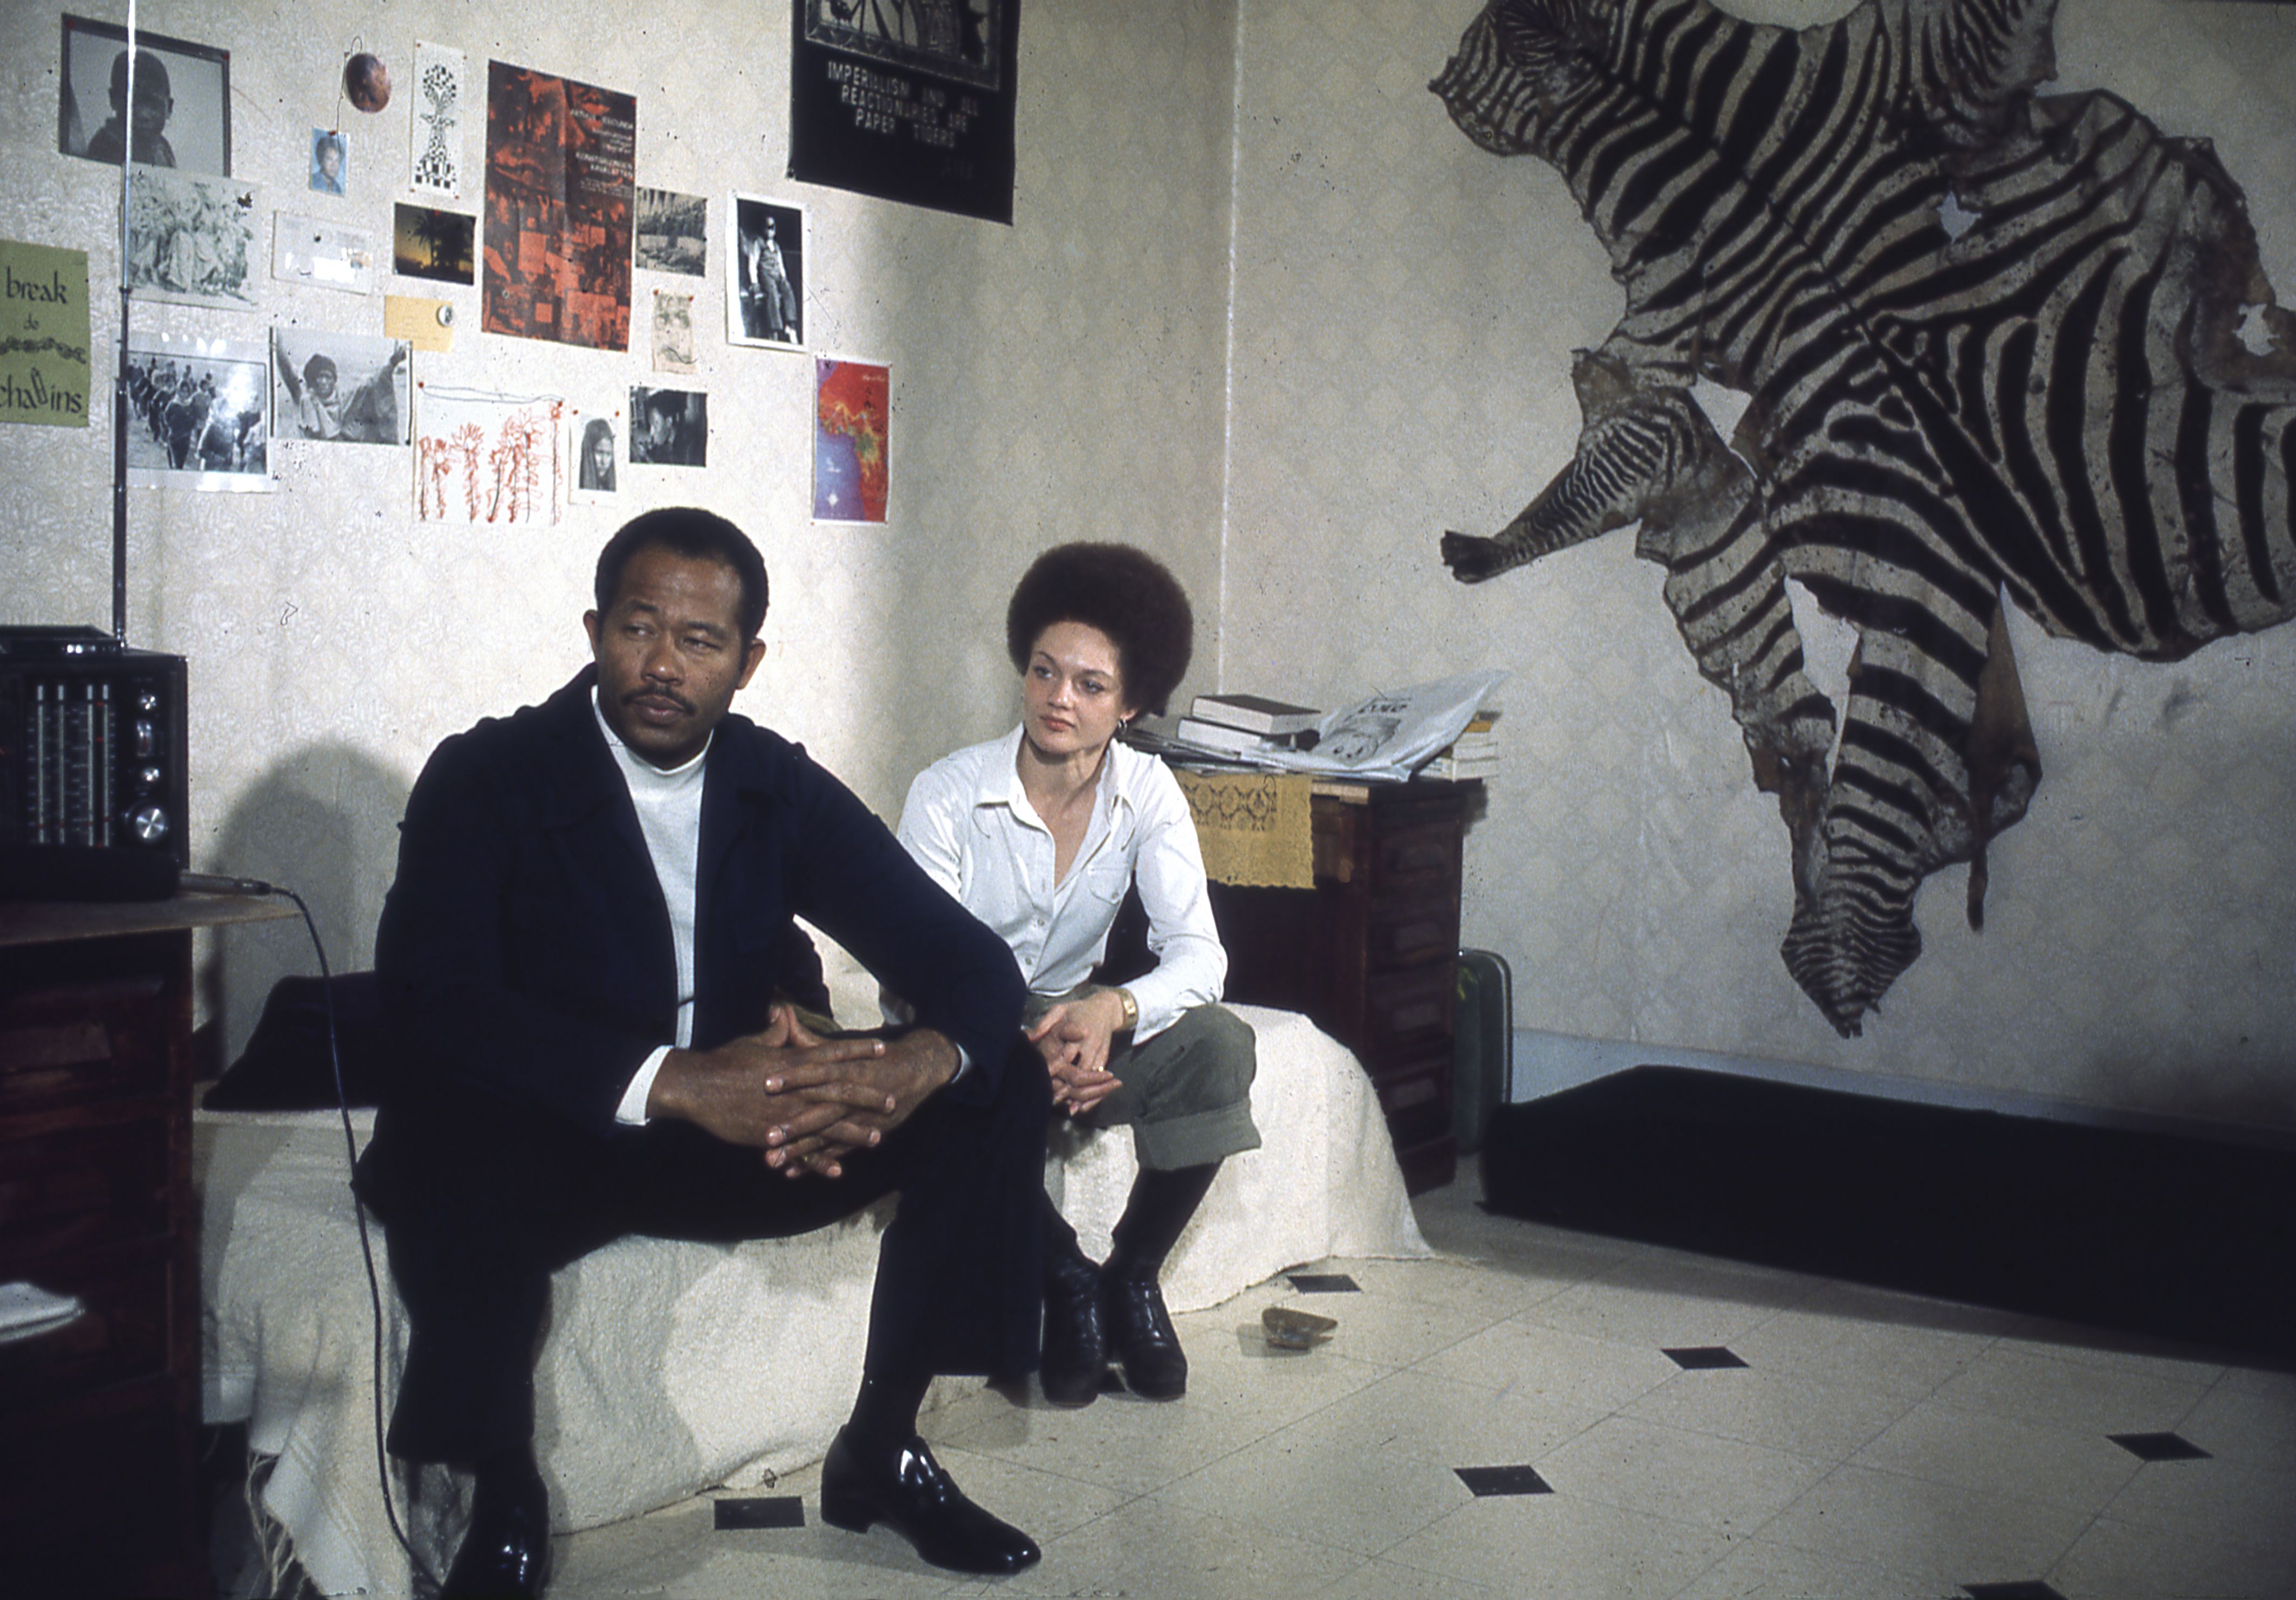 Black Panther and writer Eldridge Cleaver, an exile from American justice, and wife Kathleen sit in their apartment in Paris France during their exile circa 1974.